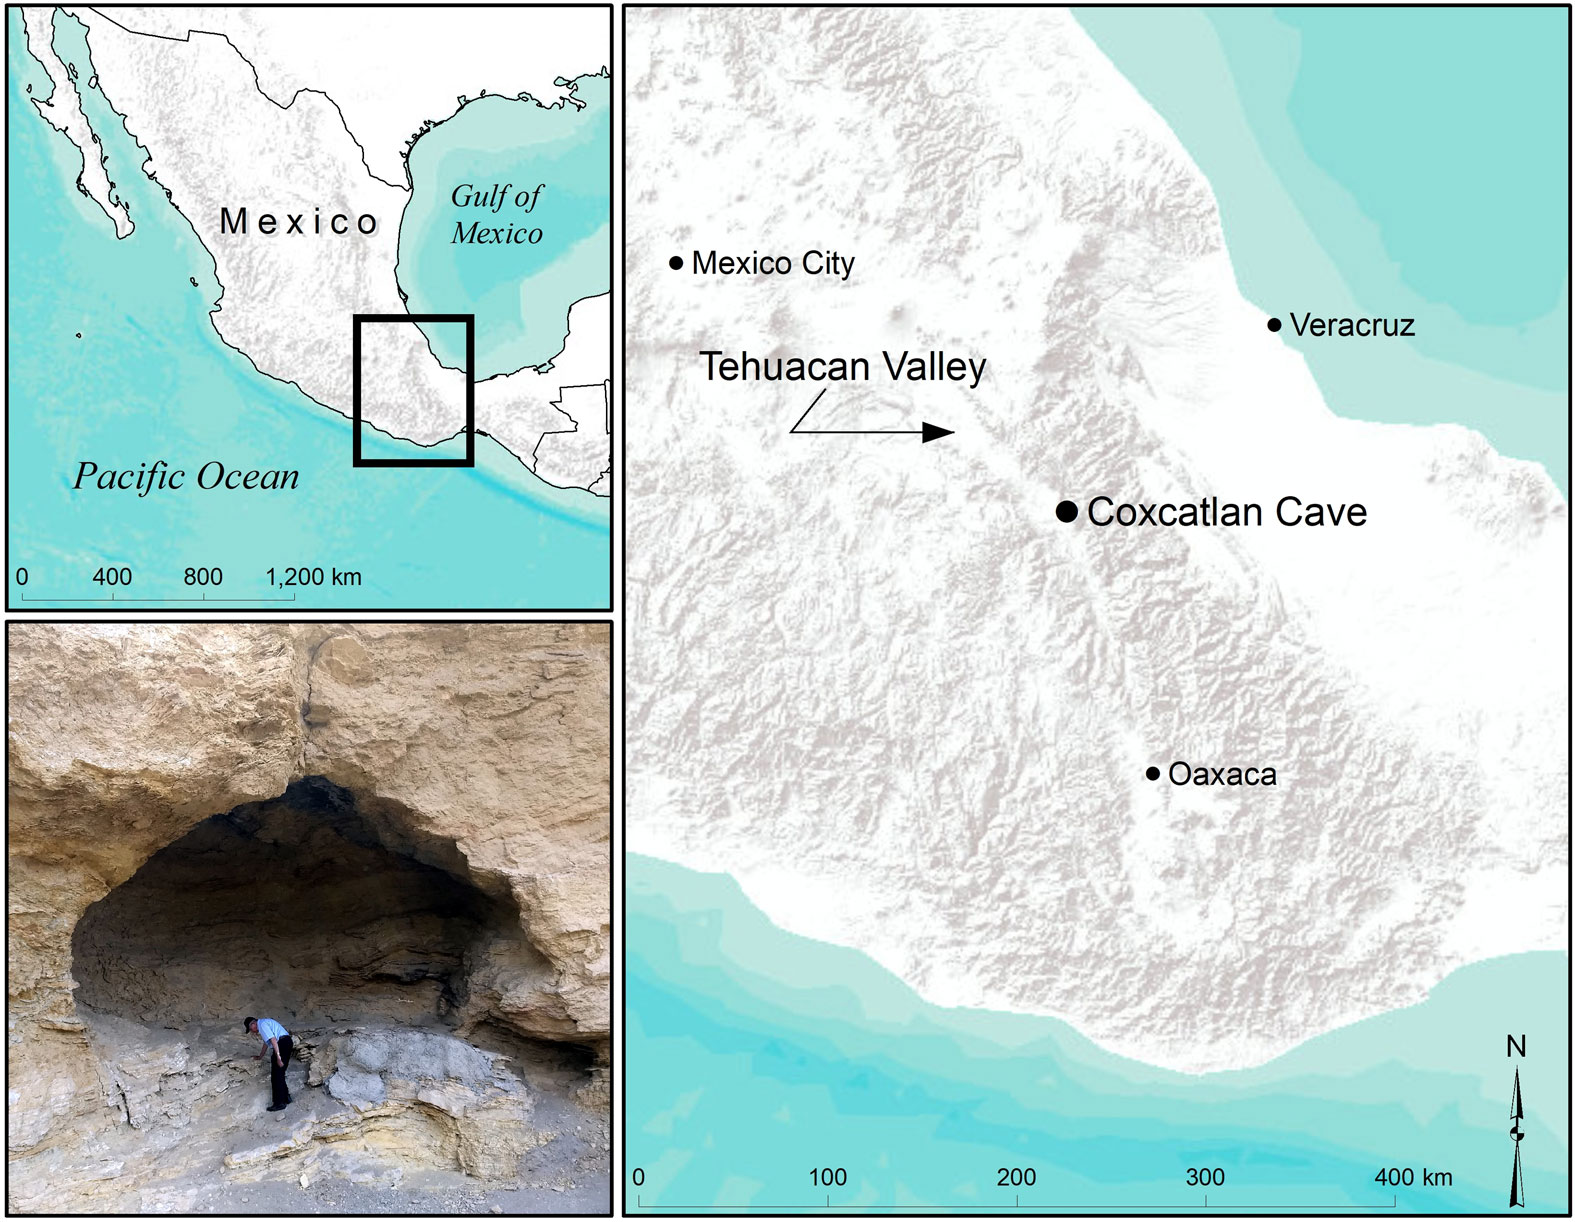 3 Panel figure of Coxcatlán cave in Puebla, Mexico. Panel 1 (top left) shows a relief map of Mexico with a rectangle near the southern part of the country. Panel 2 (right): Enlarged map showing the area of the rectangle in Panel 1. This map is also a relief map, with the Tehuanan Valley south of Mexico City labeled. The Tehuacan Valley runs roughly north-south between Mexico City and Oaxaca. Coxcatlán Cave is labeled in the center of the valley. It is roughly west of Veracruz on the east coast of Mexico. Panel 3: Photograph of Coxcatlán Cave. The photo shows a arched cave entrance in buff-color rock. A person is leaning over in the entrance, with is much taller than the person.